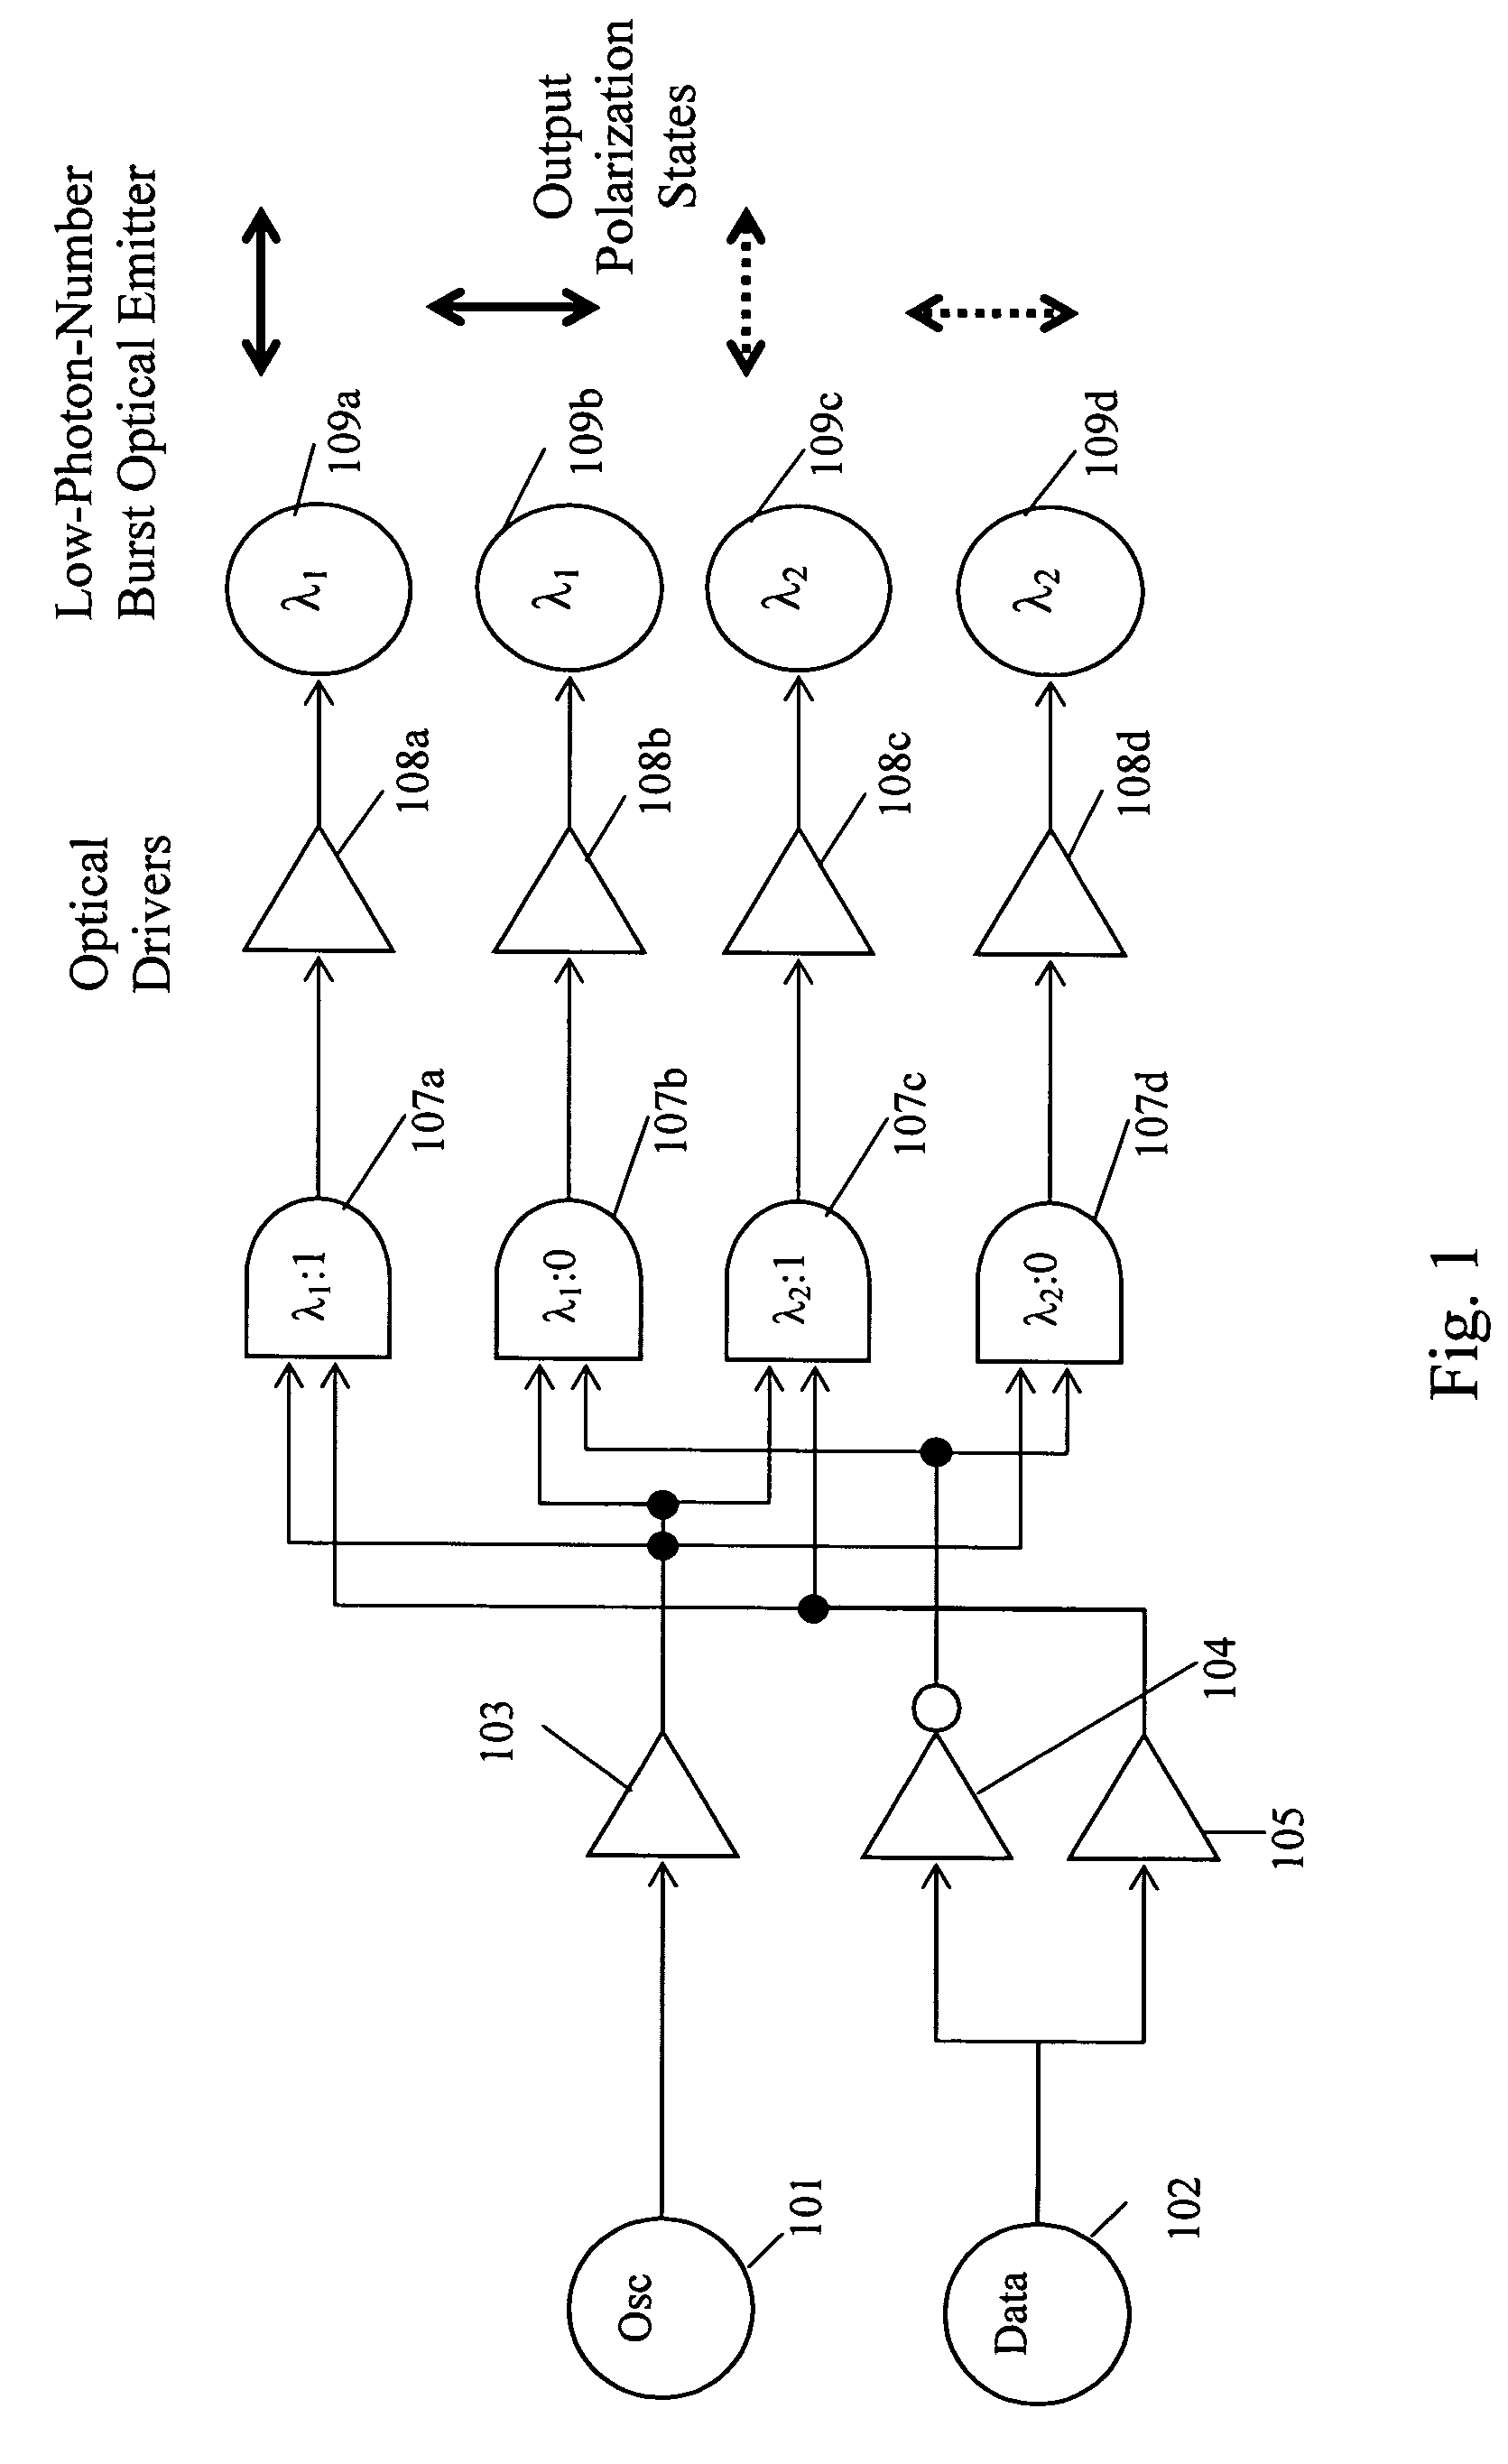 Multi-wavelength time-coincident optical communications system and methods thereof